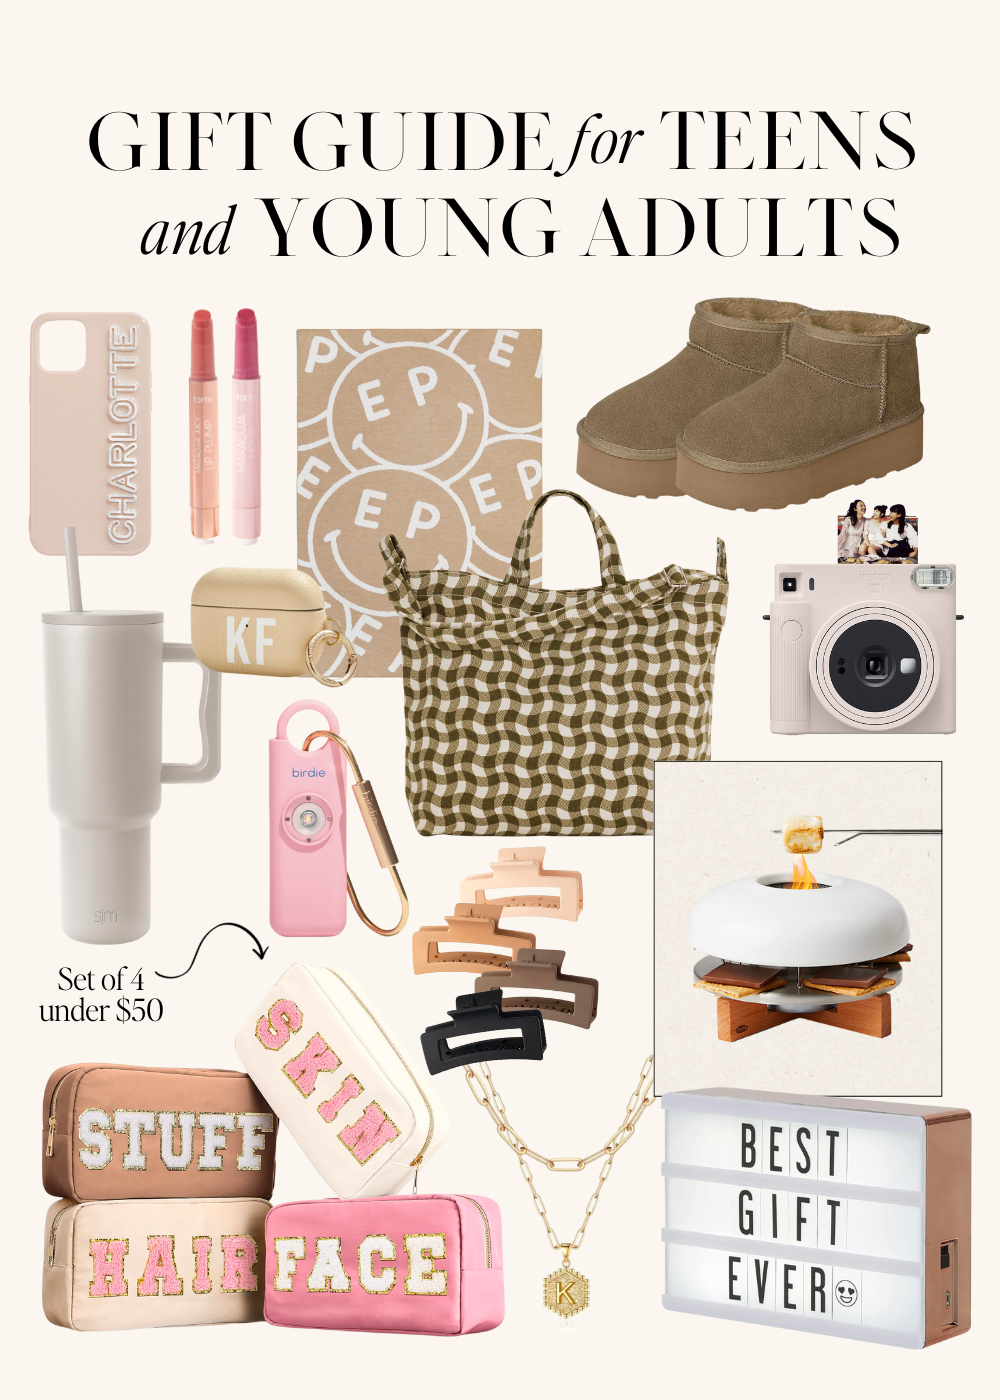 Gifts for Teens & Young Adults - Danielle Gervino